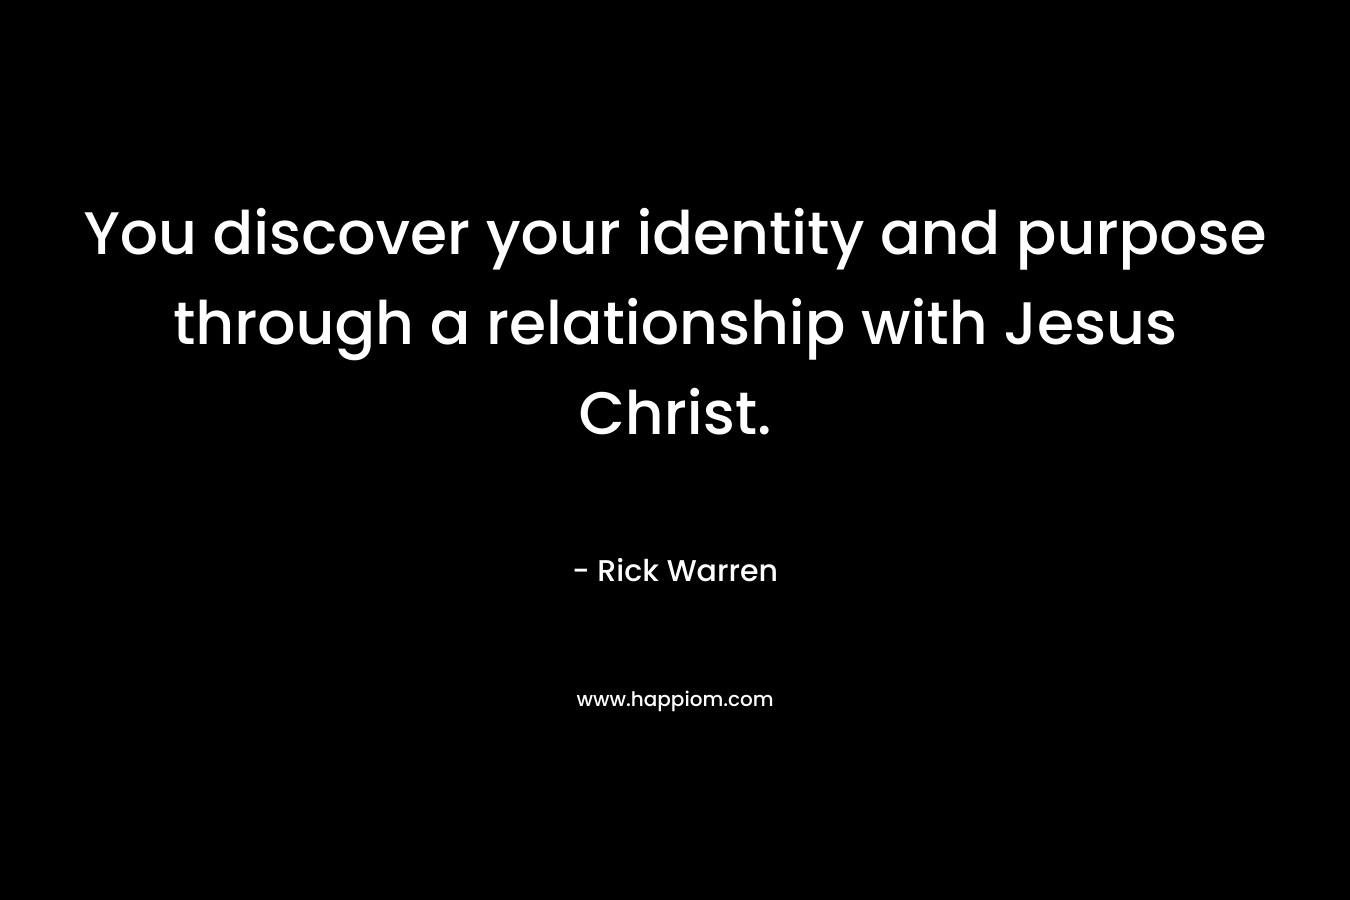 You discover your identity and purpose through a relationship with Jesus Christ. – Rick Warren